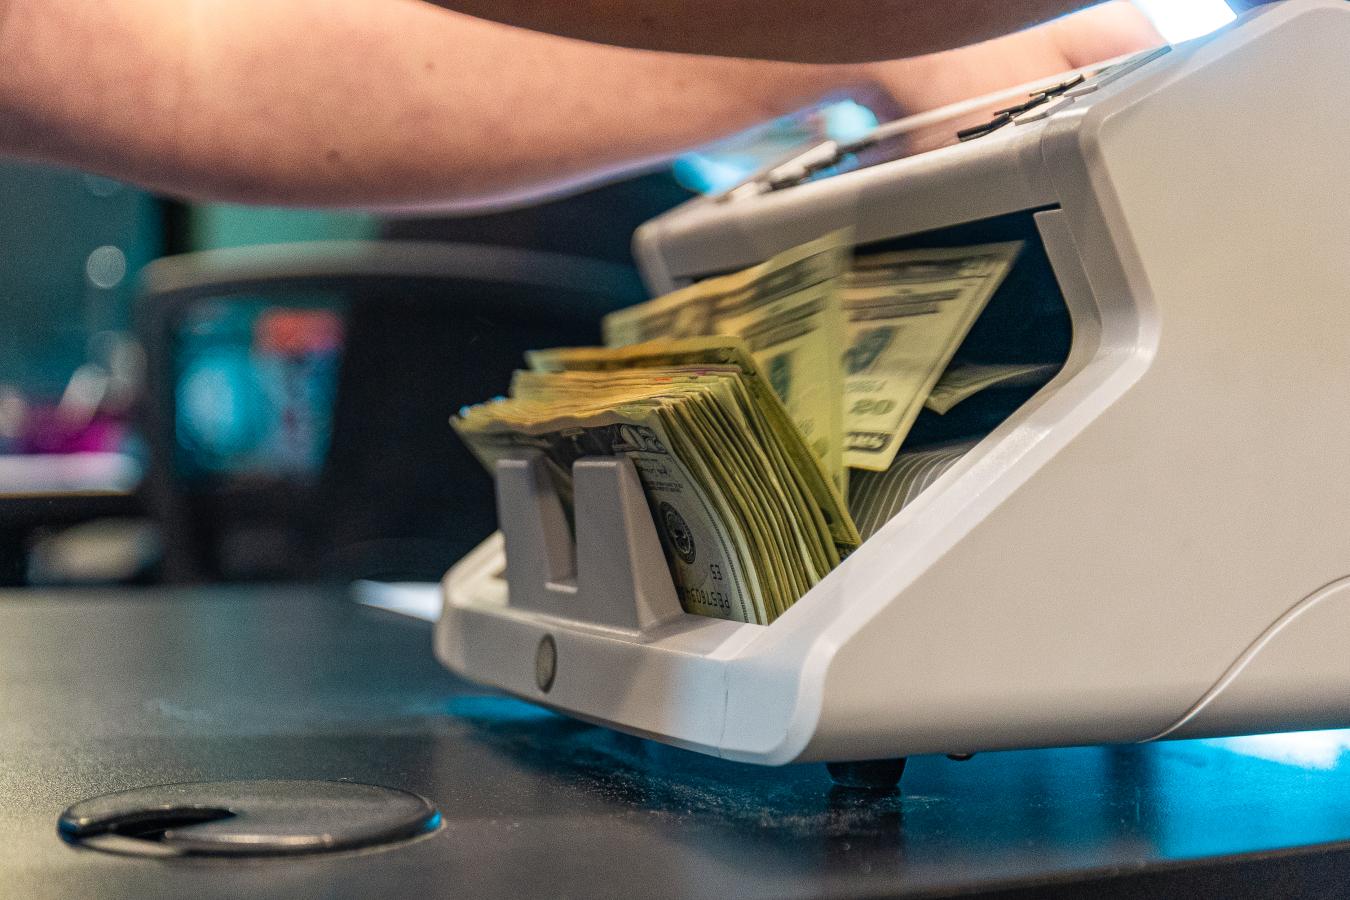 Person operating a money counting machine full of 20 dollar bills